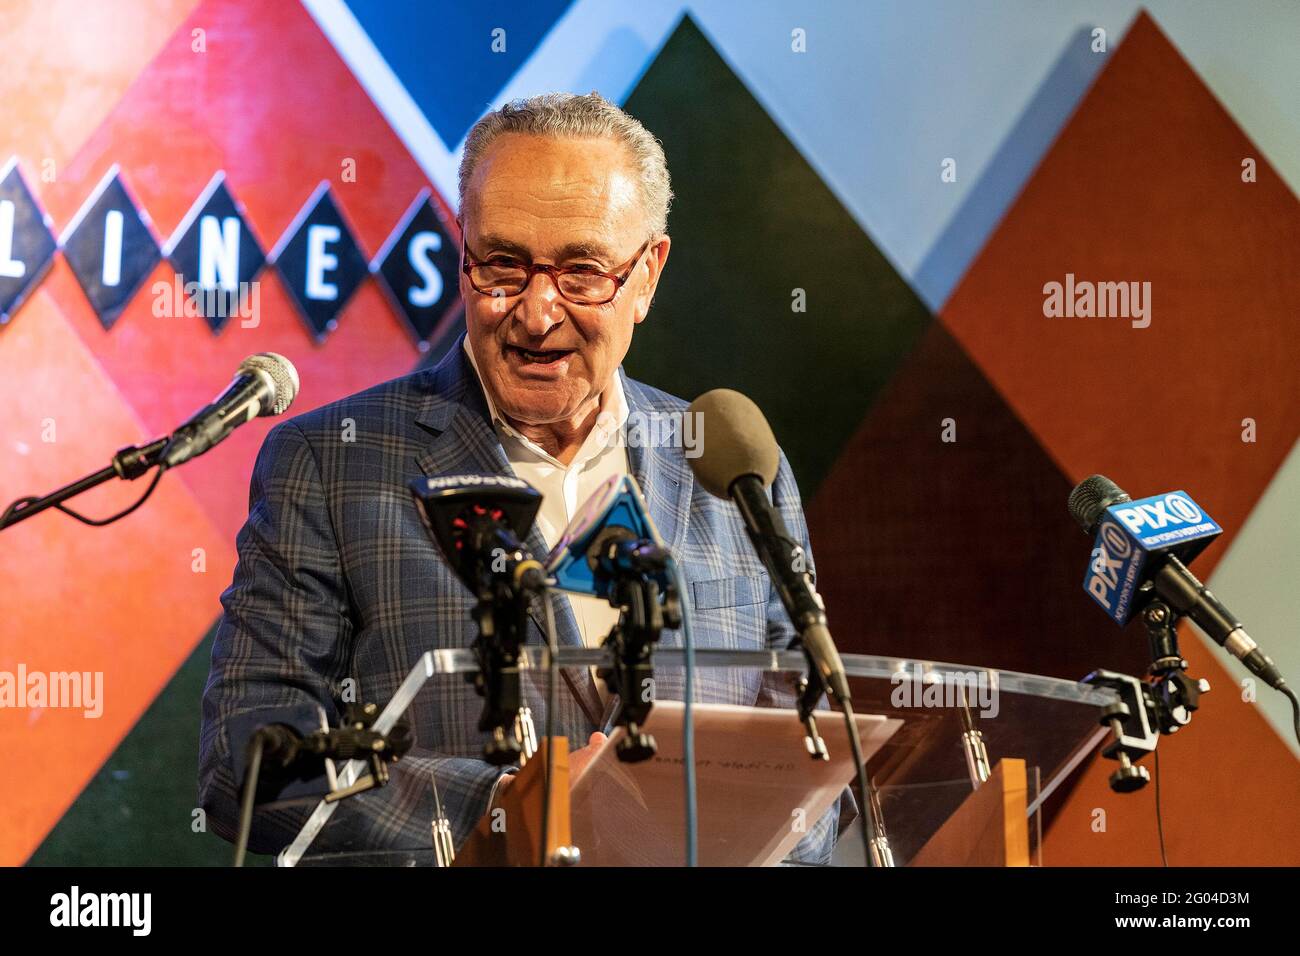 New York, United States. 31st May, 2021. U. S. Senator Charles Schumer speaks at Carolines on Broadway comedy club re-opening after pandemic ceremony. Senator Charles Schumer lauded Safe our Stages (SOS) bill passed by Senate to help cultural venues to survive pandemic. He also cracked few jokes saying it is comedy club he does not have a choice but say them. (Photo by Lev Radin/Pacific Press) Credit: Pacific Press Media Production Corp./Alamy Live News Stock Photo